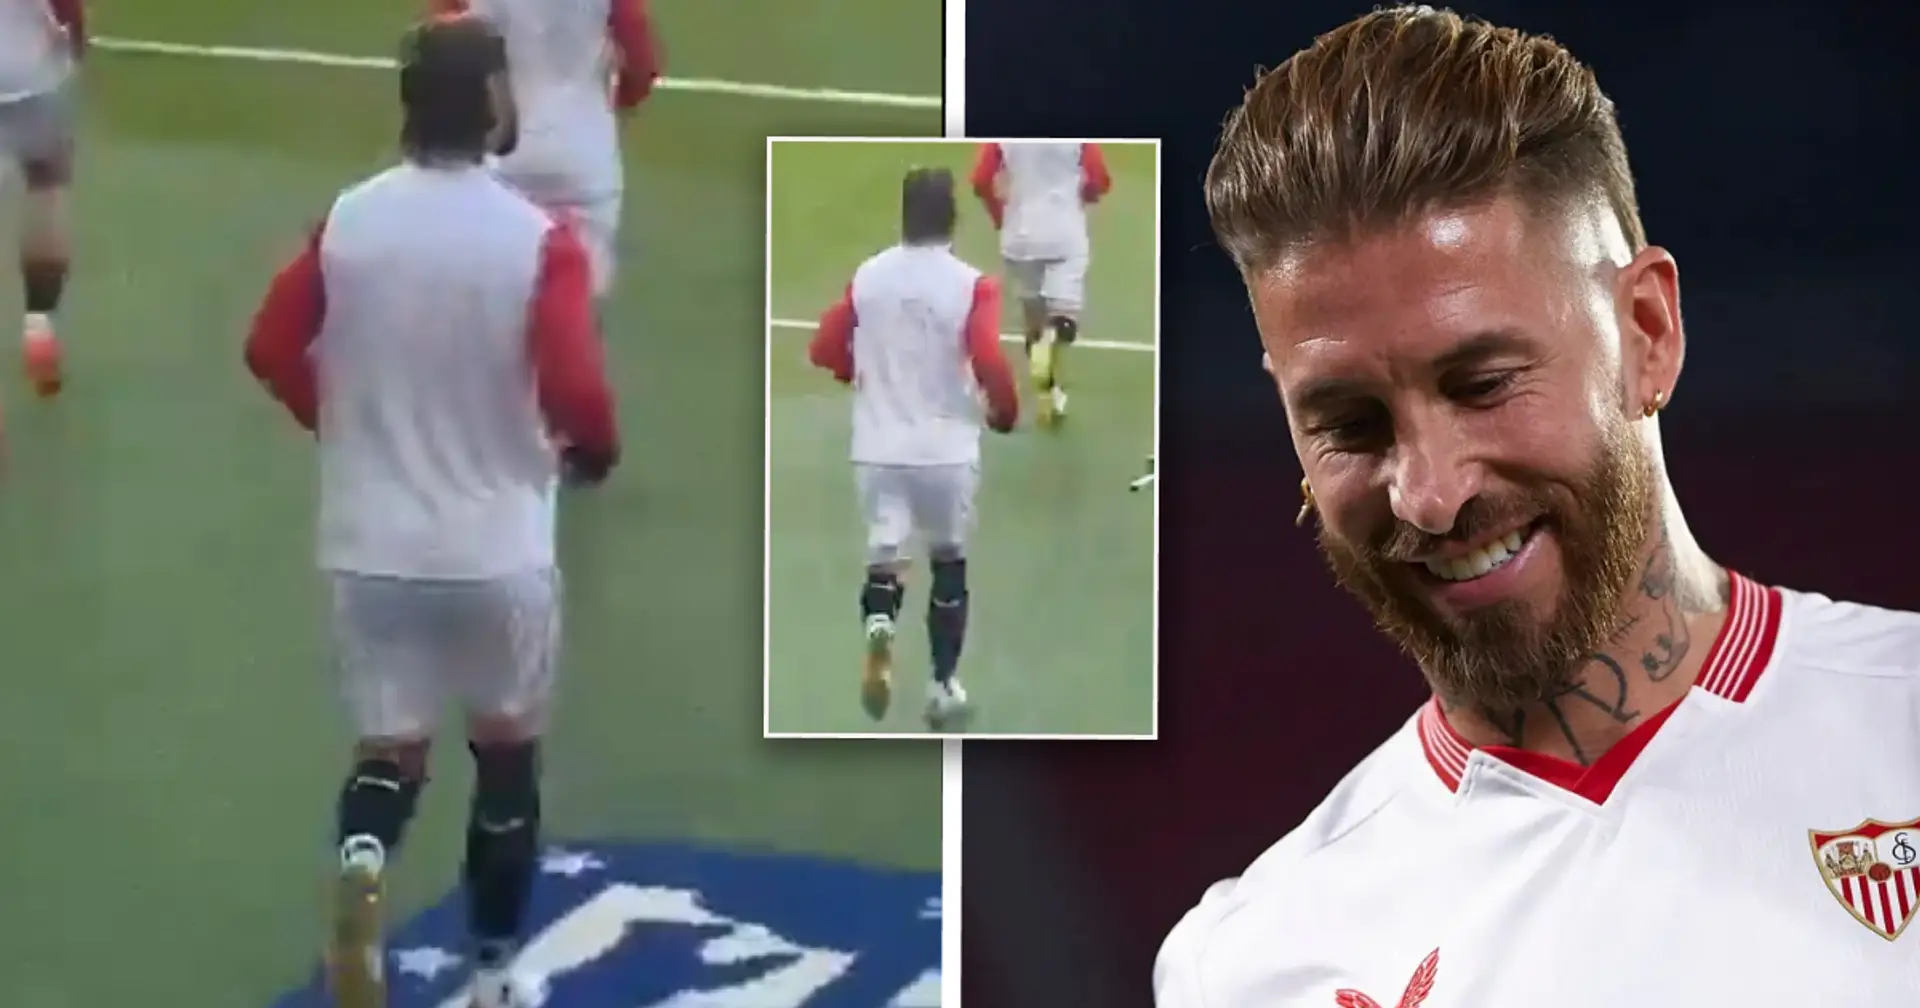 Ramos infuriates Atletico fans with one action before kickoff — they rain insults immediately